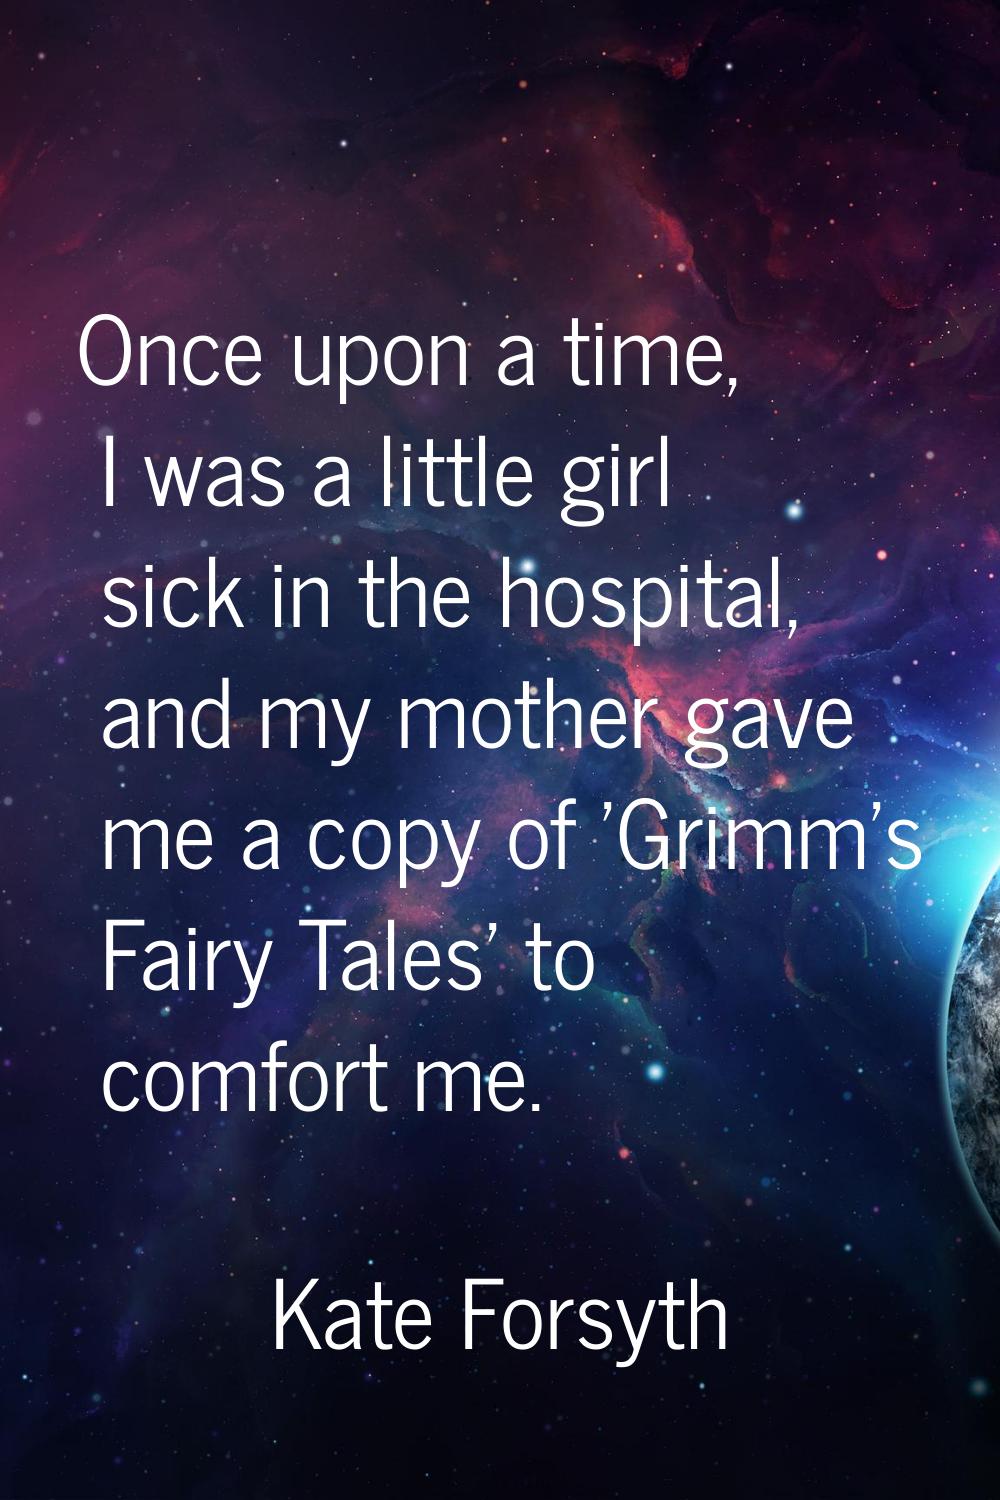 Once upon a time, I was a little girl sick in the hospital, and my mother gave me a copy of 'Grimm'